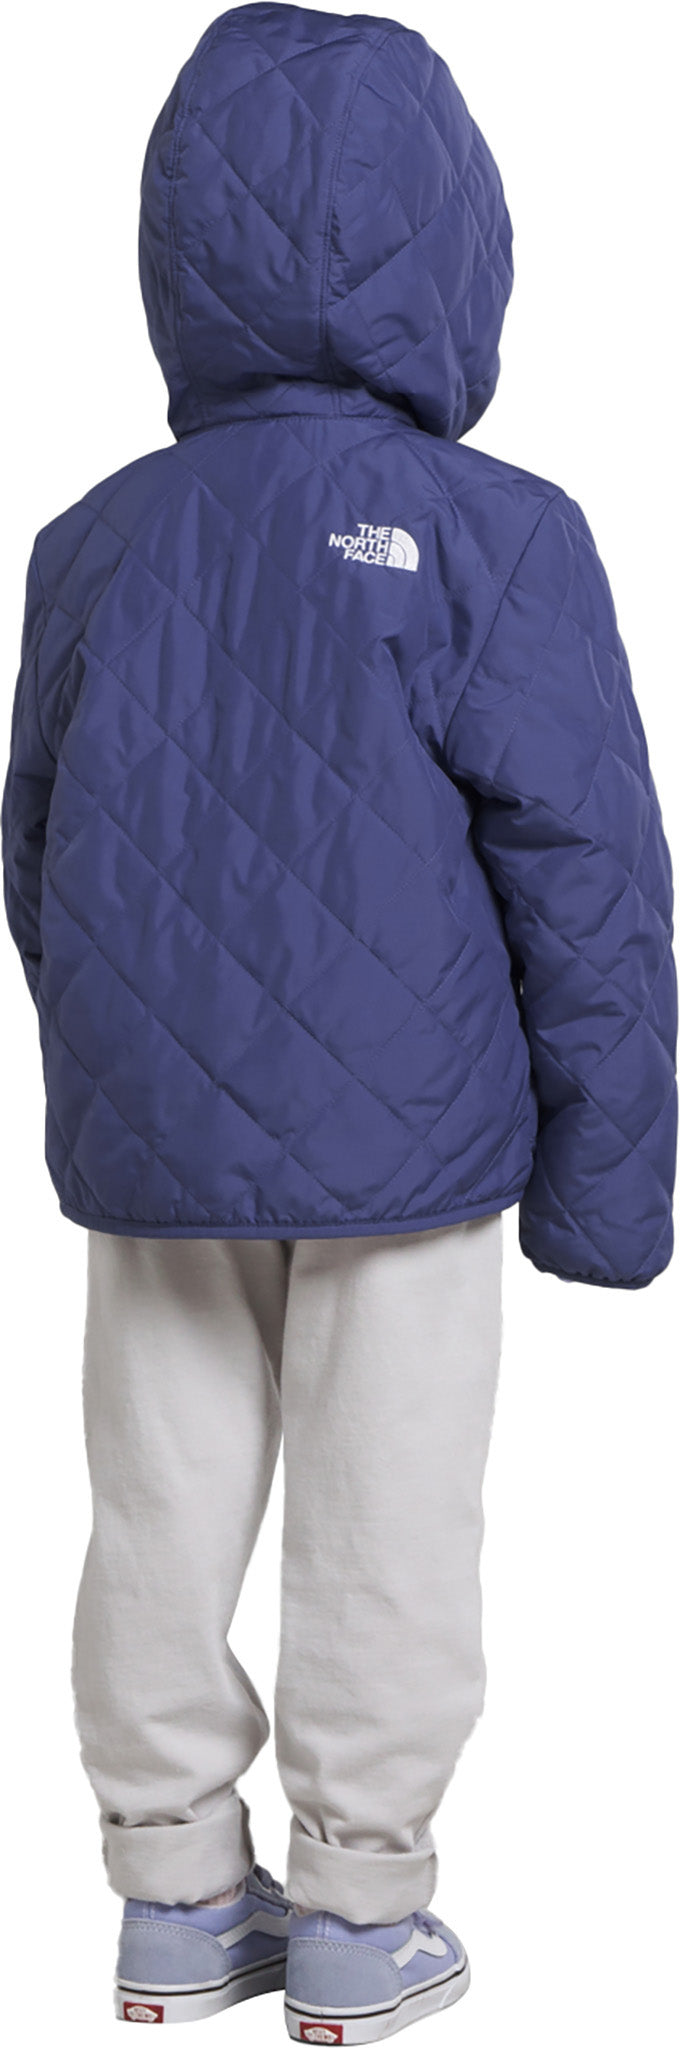 The North Face Shady Glade Reversible Hooded Jacket - Kids